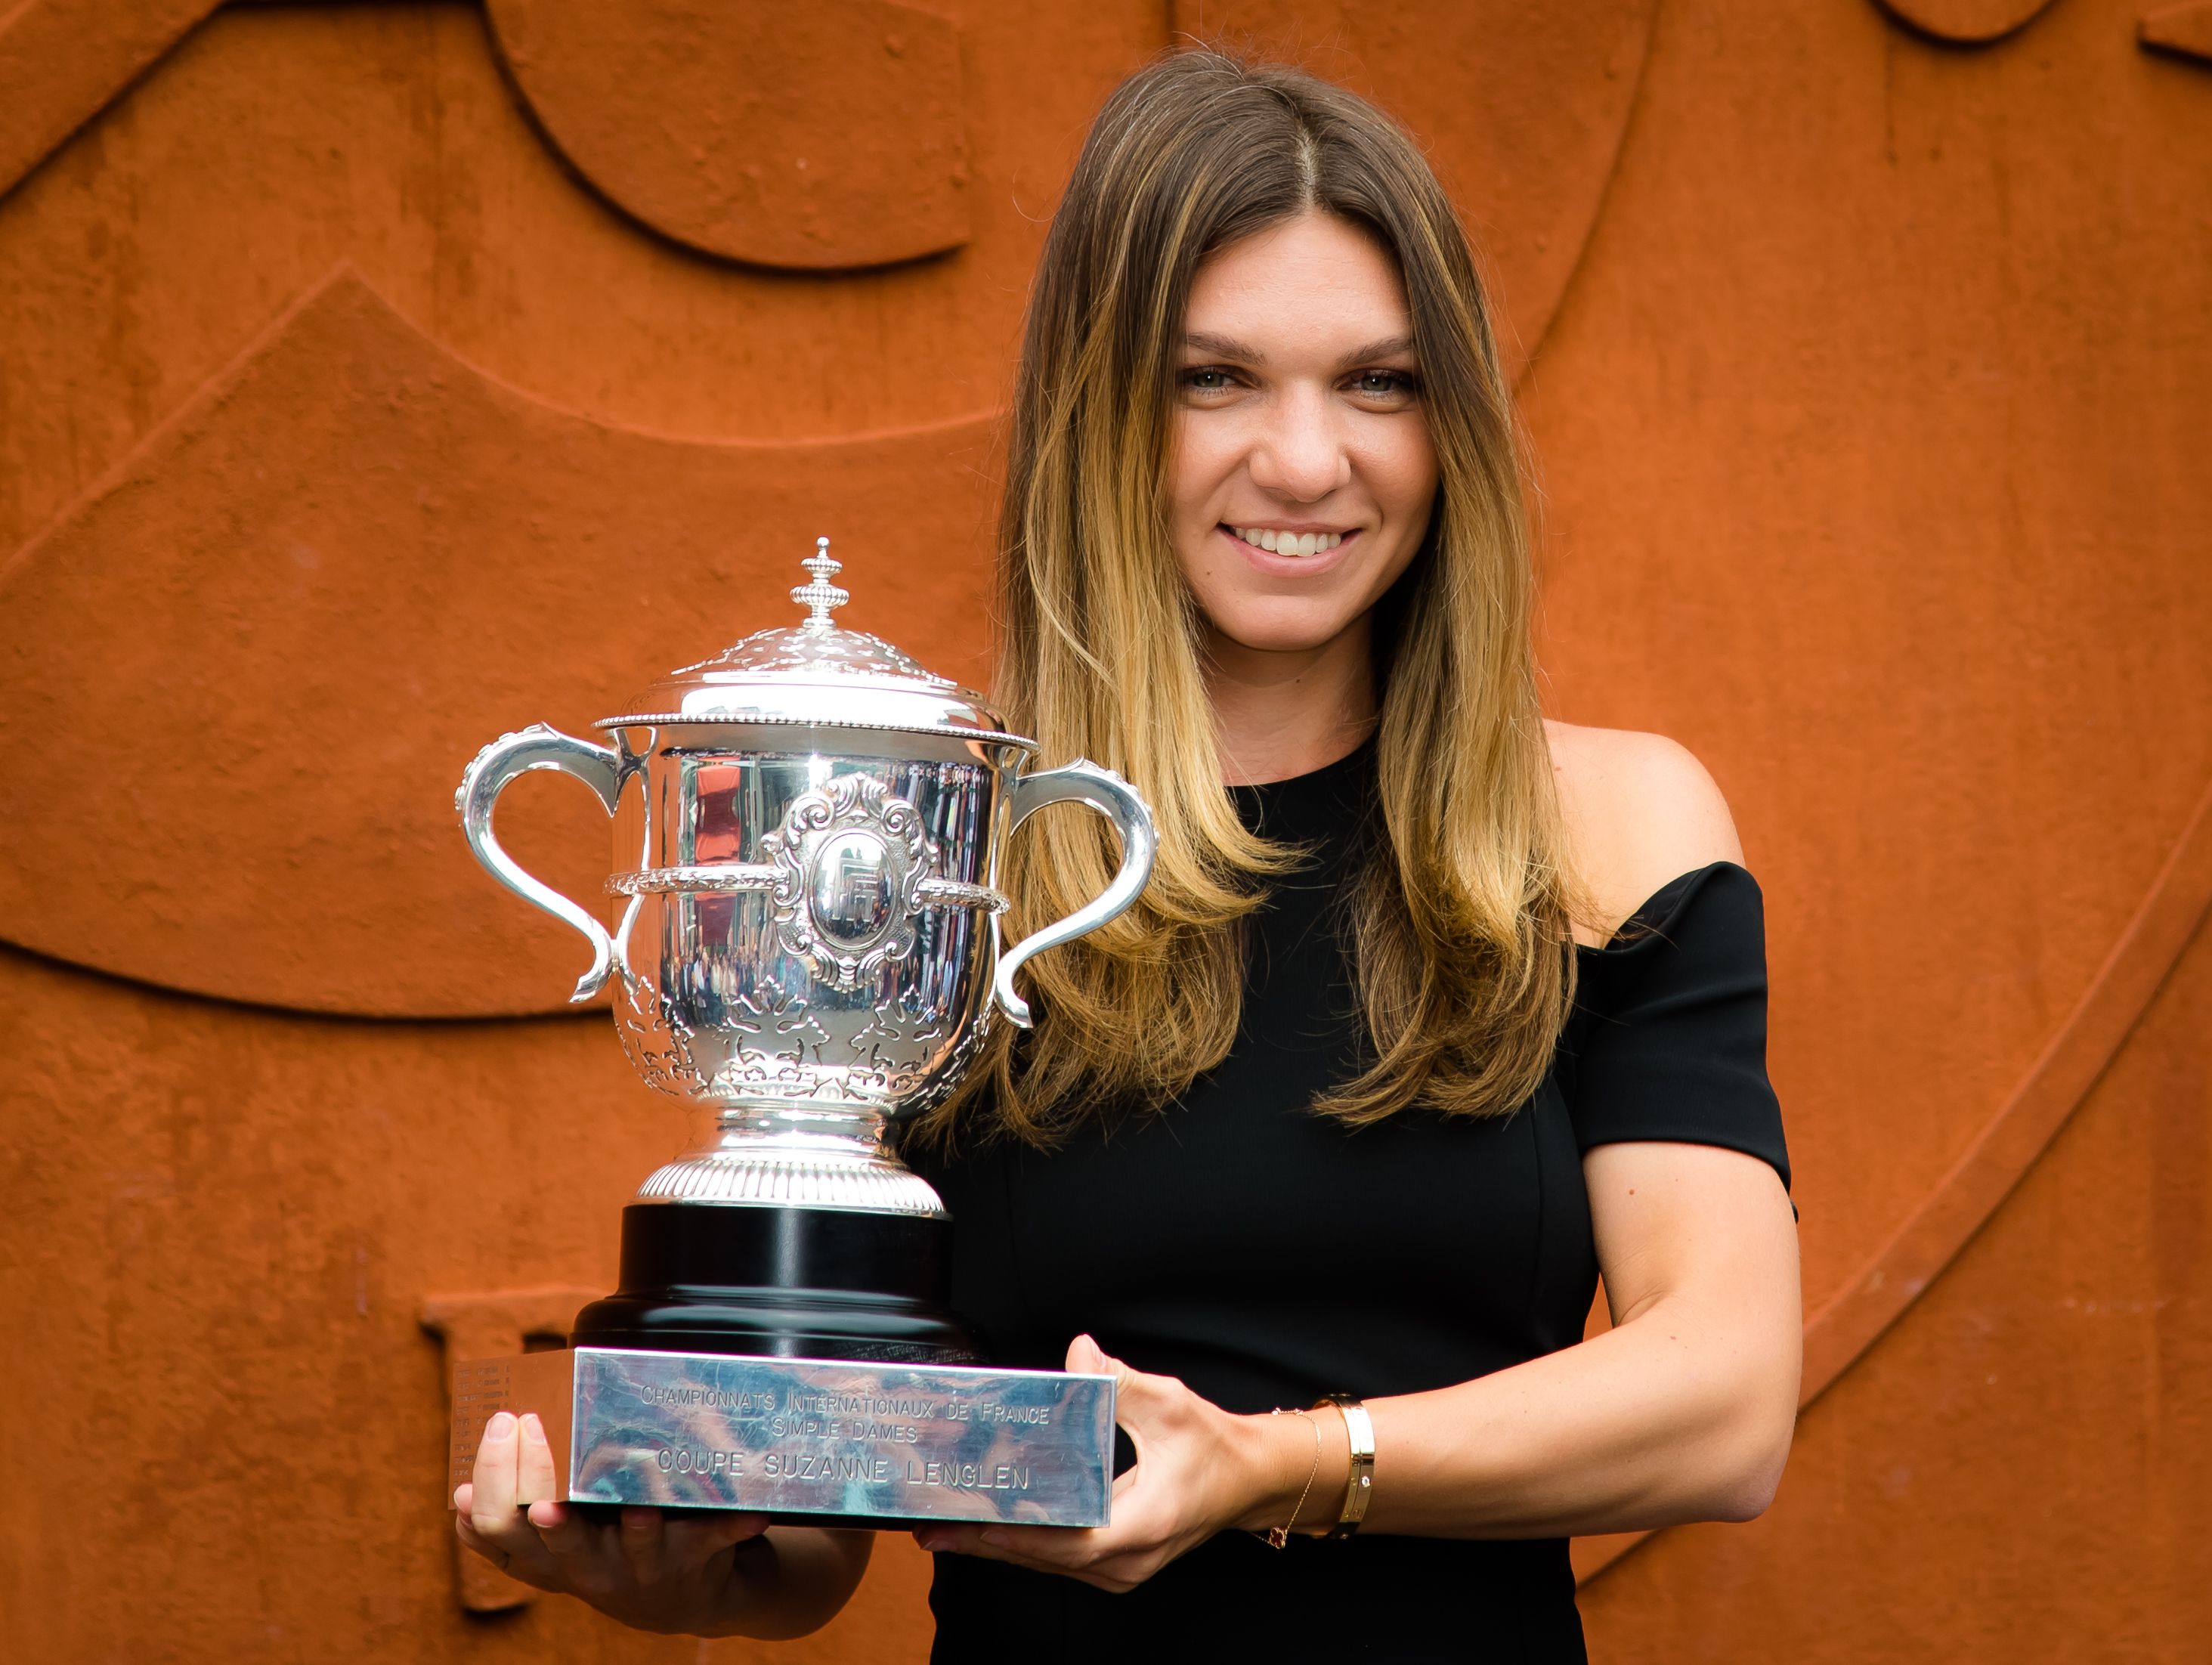 Rafael Nadal and Simona Halep win 2018 French Open Titles2927 x 2203